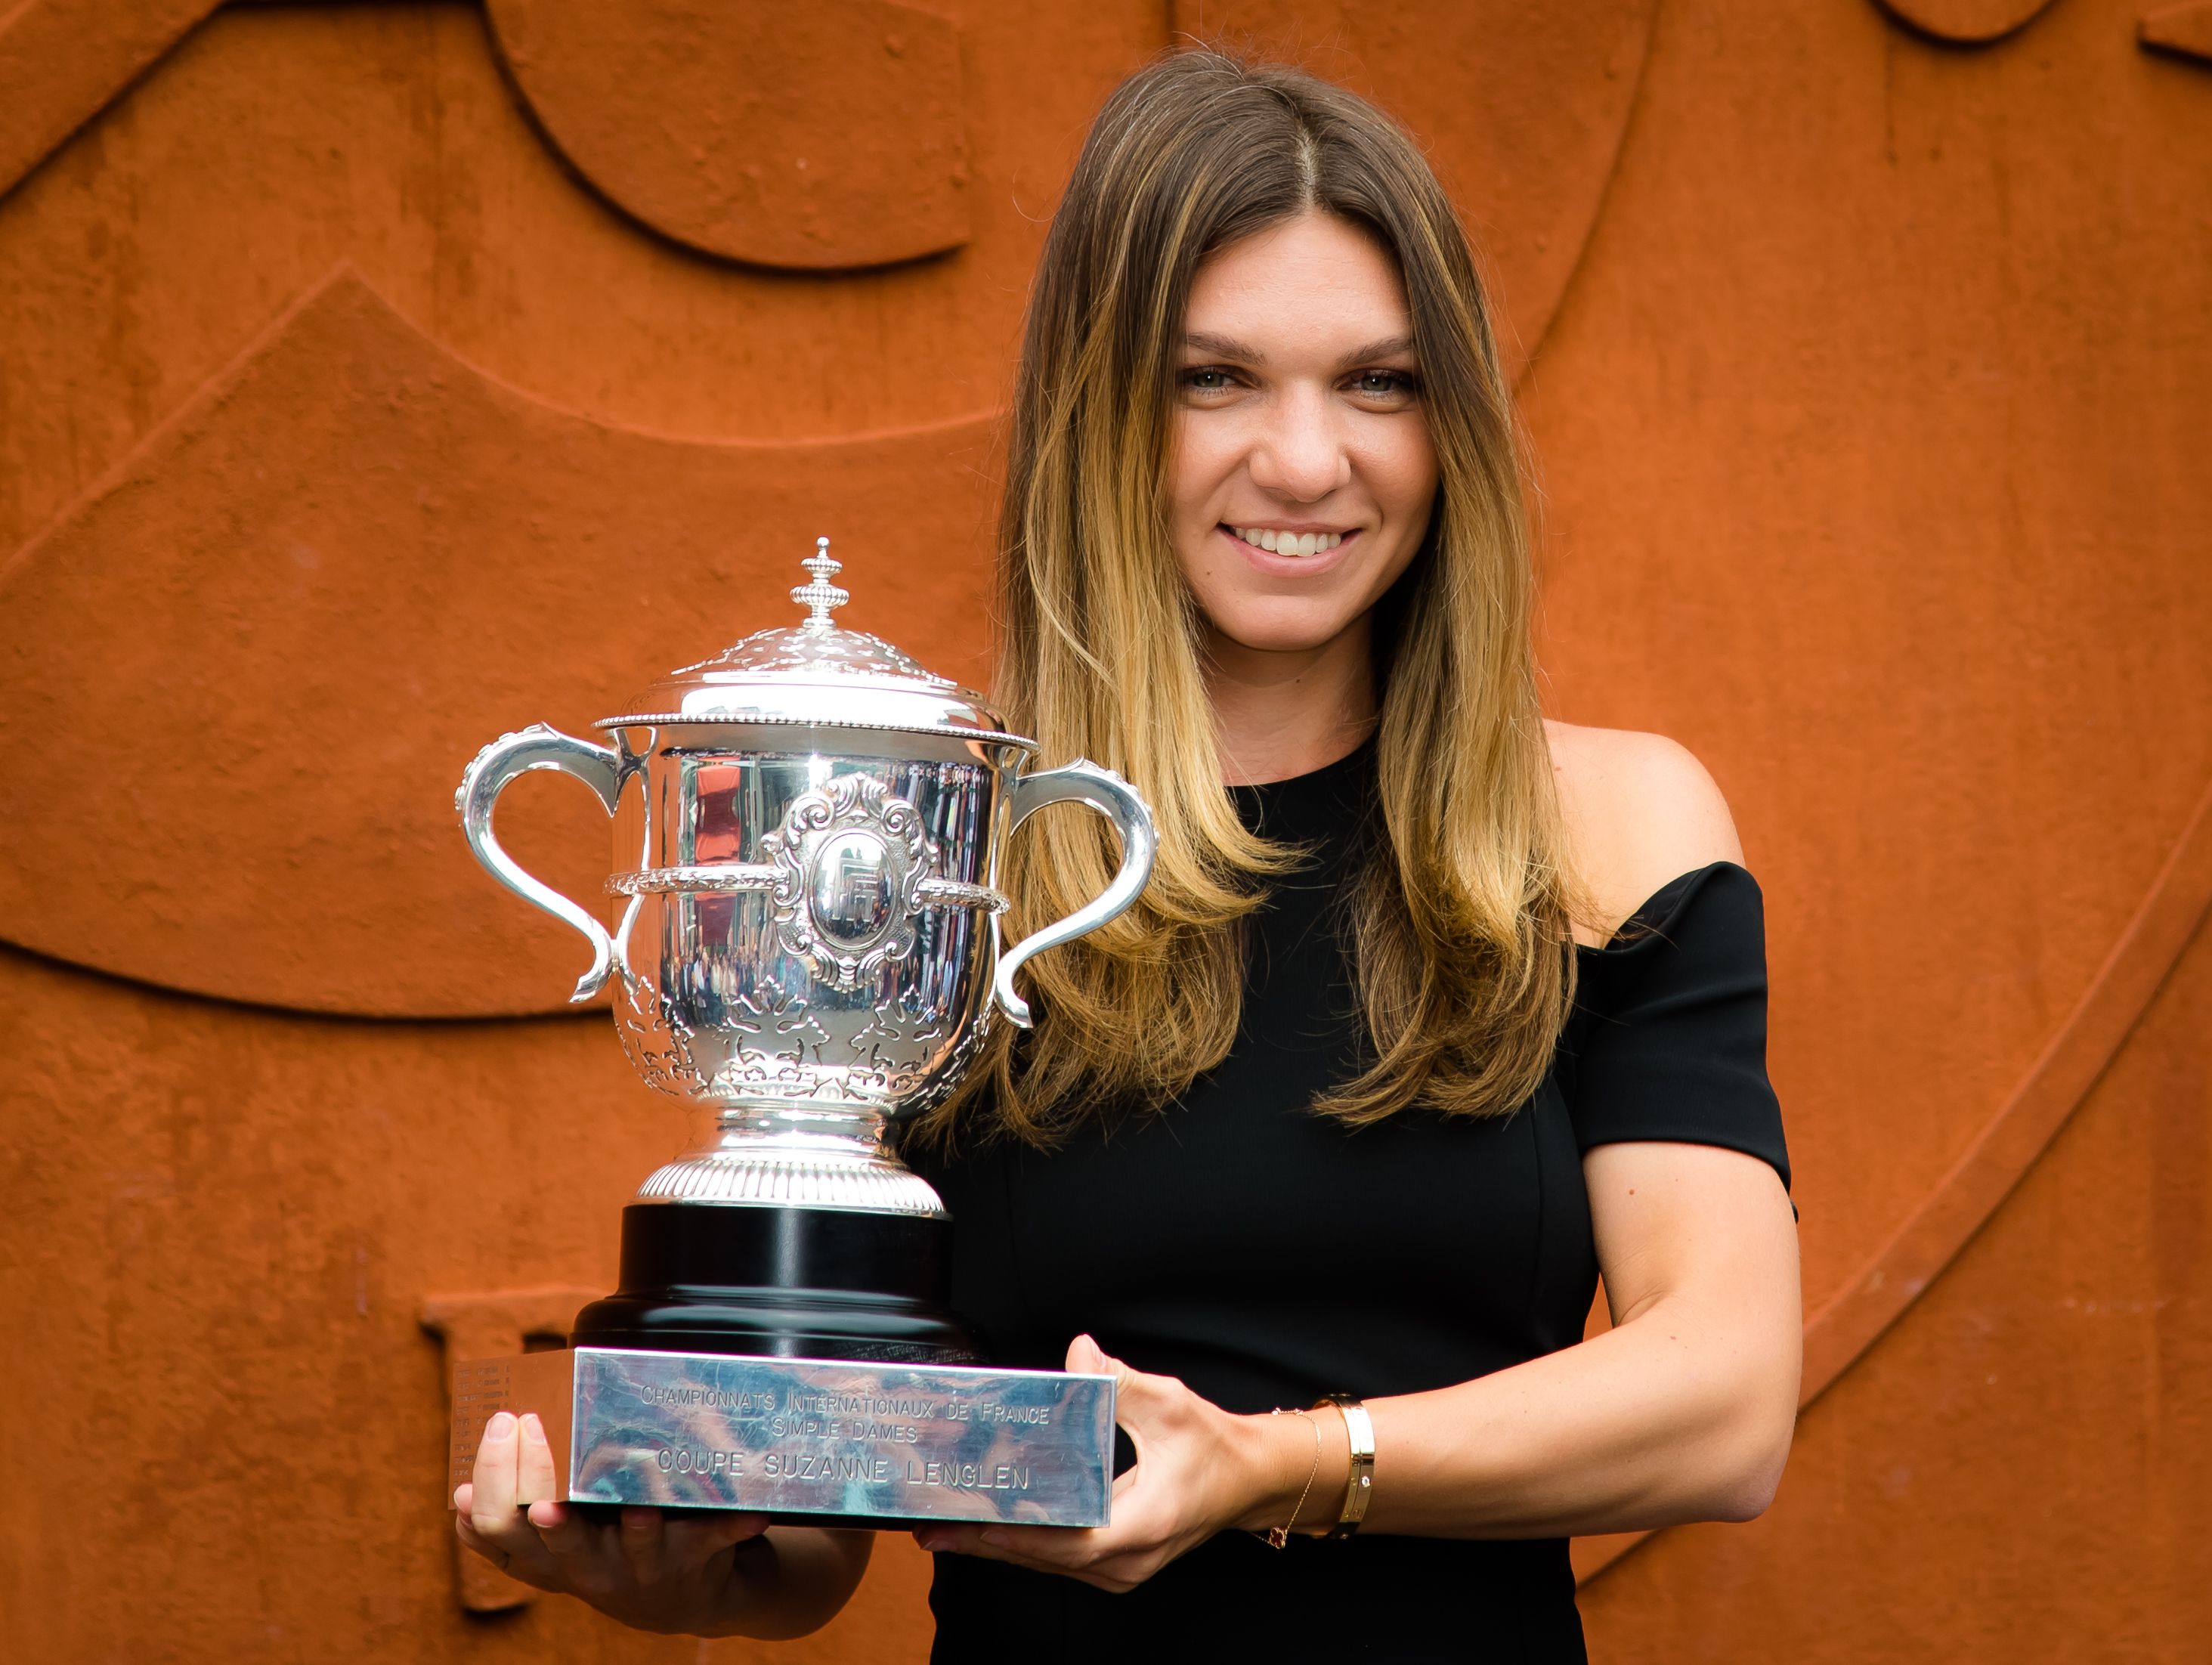 Rafael Nadal and Simona Halep win 2018 French Open Titles2927 x 2203